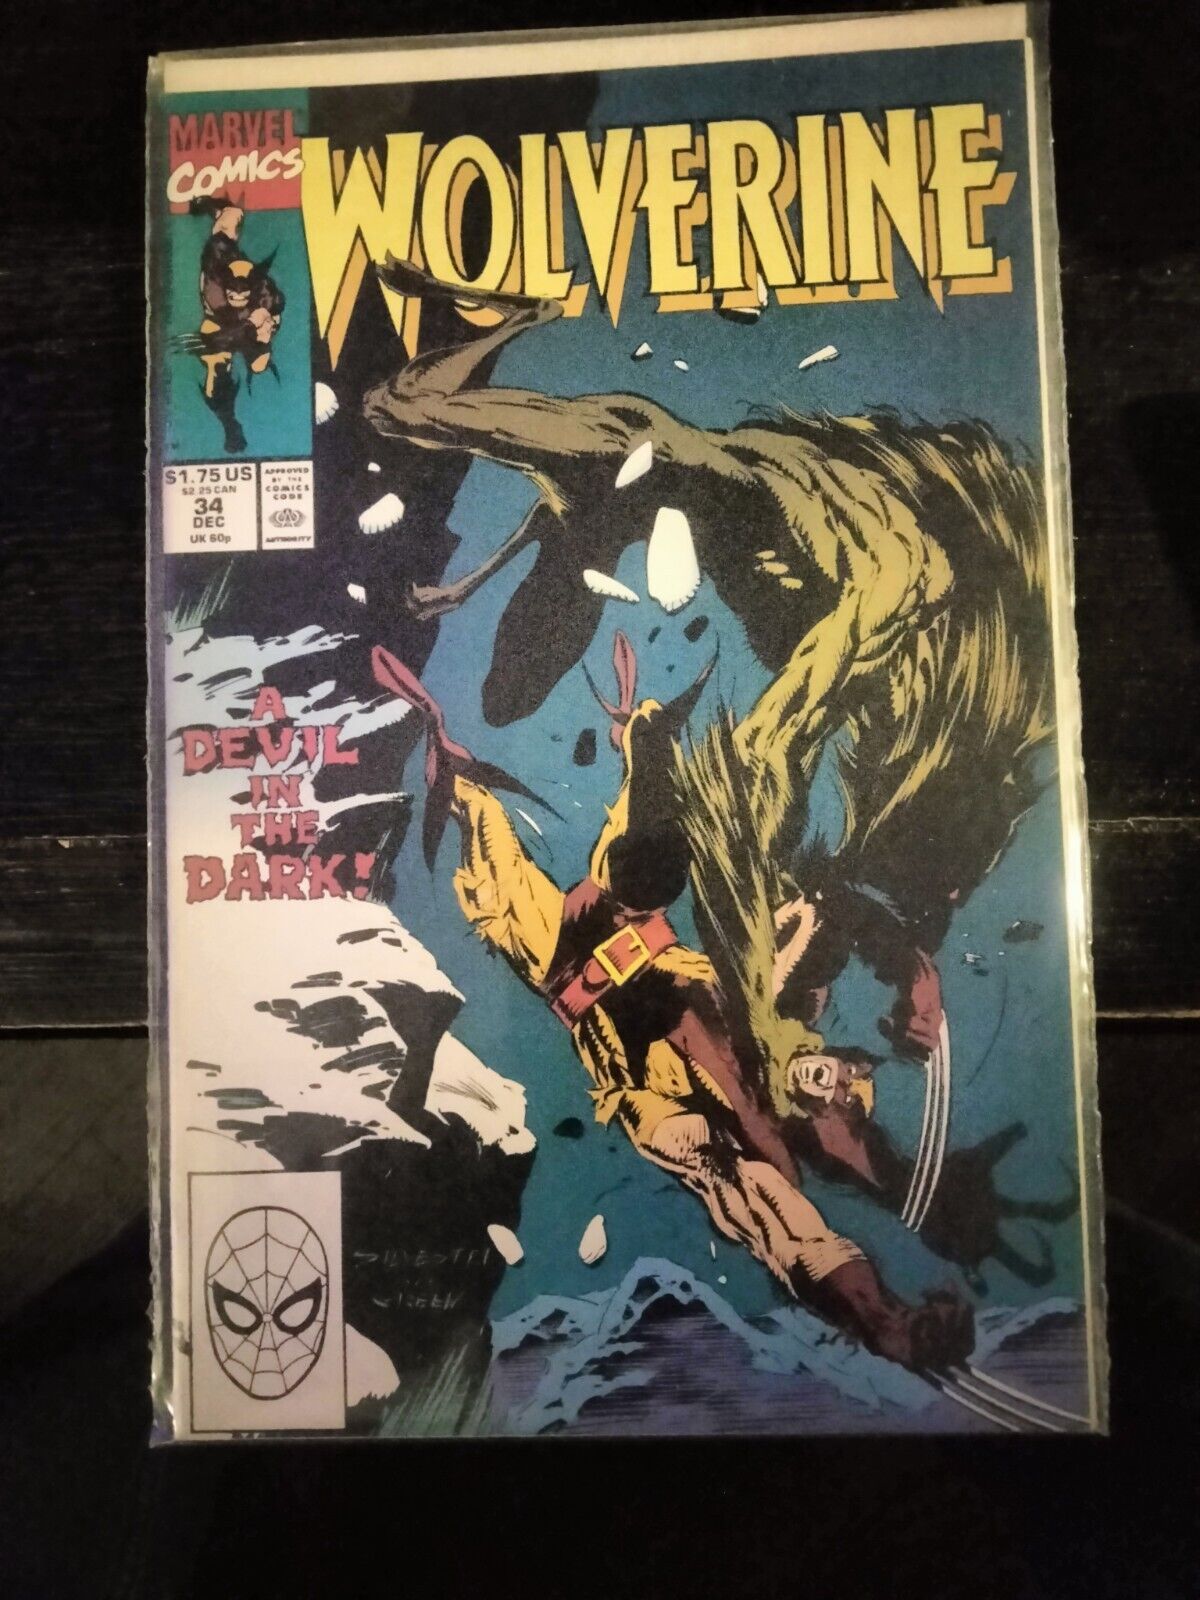 WOLVERINE #34 (NM) X-MEN, HIGH GRADE COPPER AGE MARVEL, $3.95 FLAT RATE SHIPPING